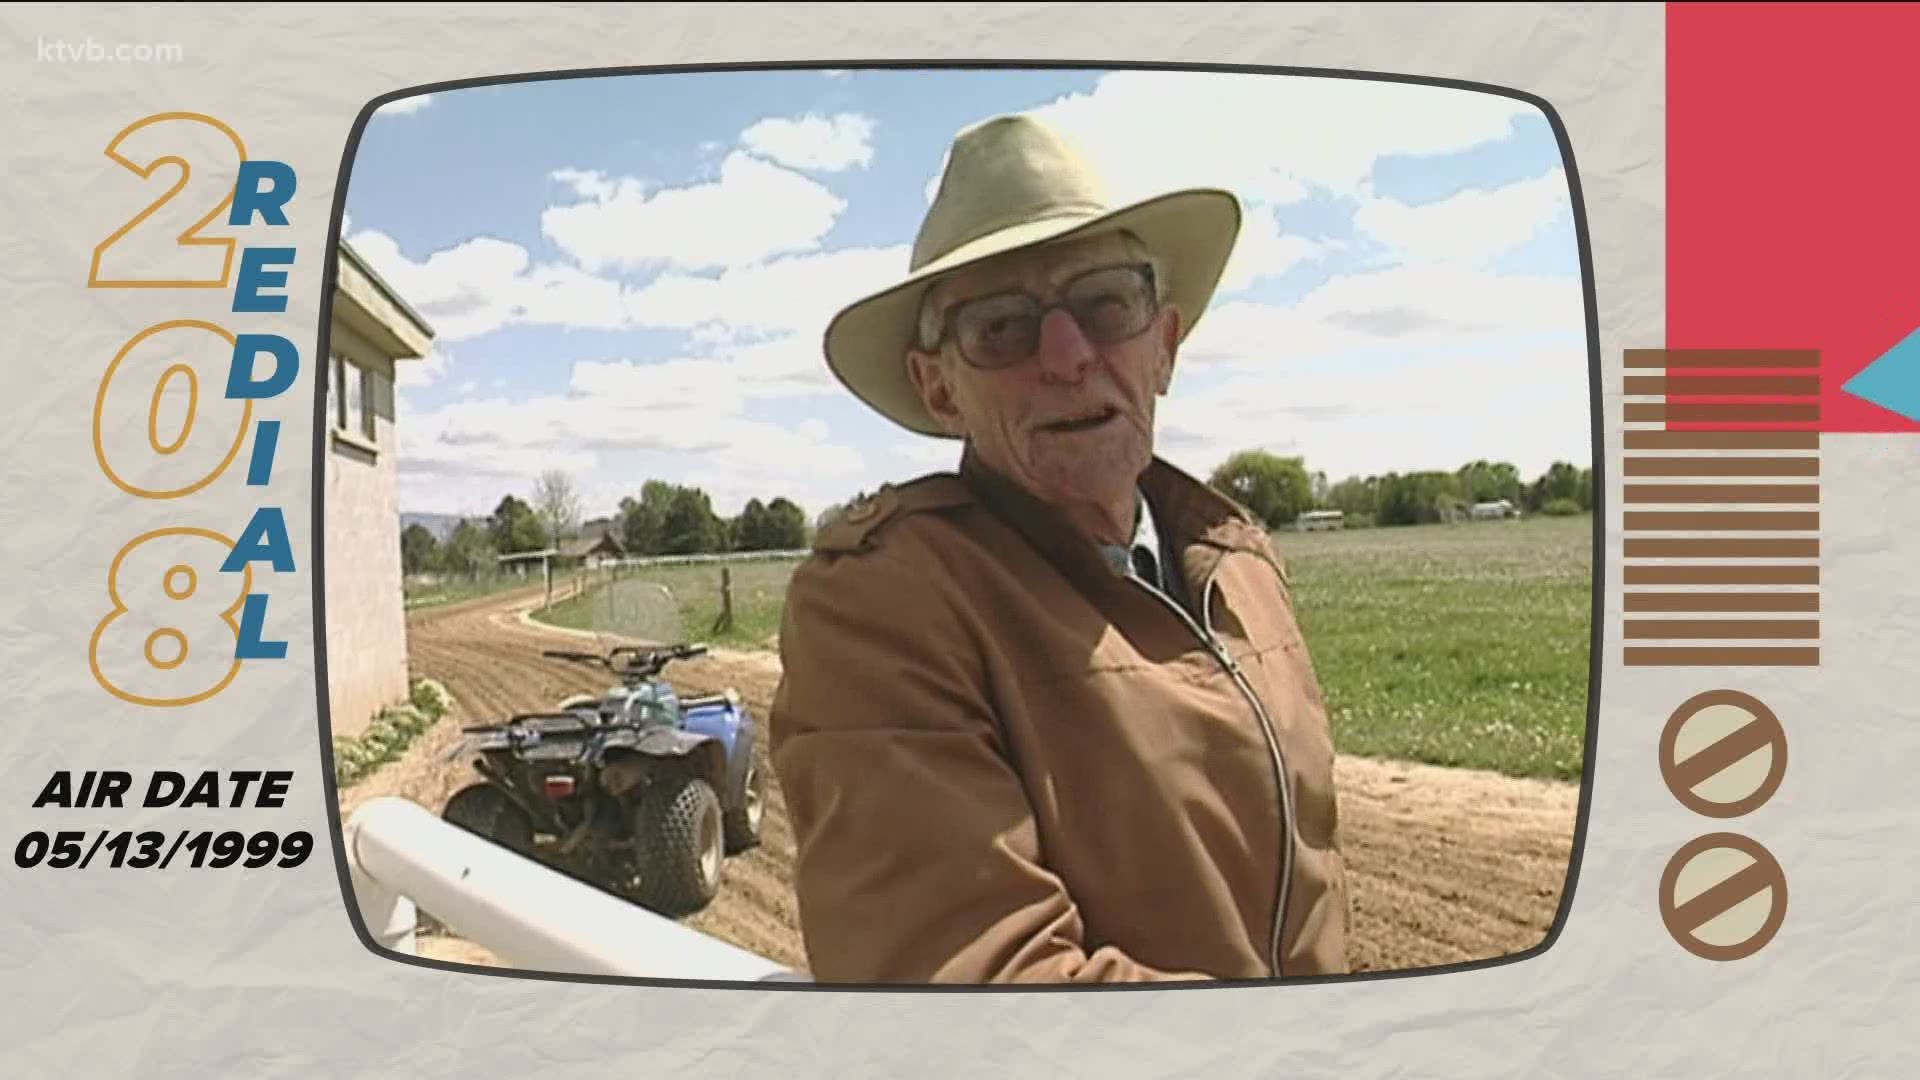 In 1999, former KTVB life reporter John Miller met a man by the name of Jake Molenaar, an 84-year-old retiree who was still training thoroughbred horses on his farm.